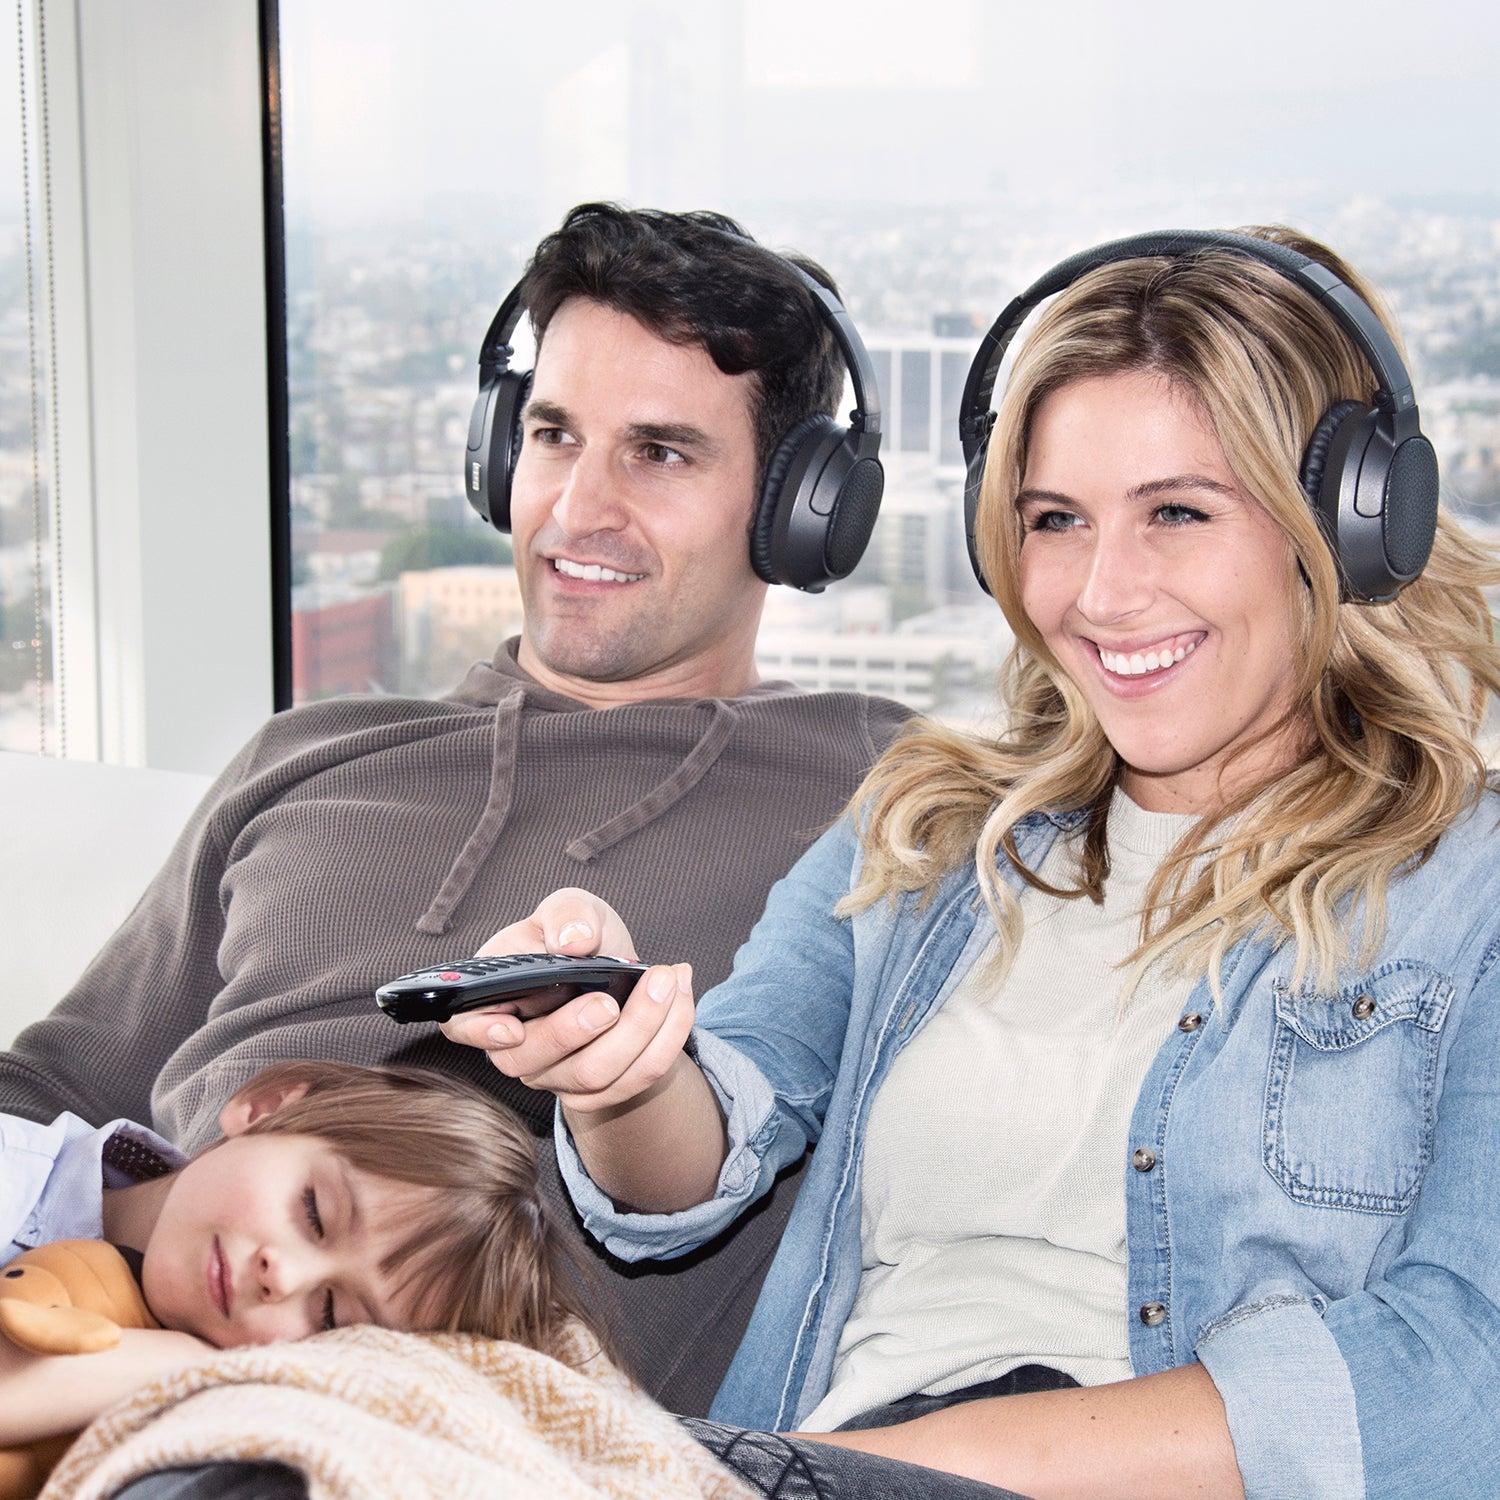 A happy family enjoying time together in a sunlit room; a man and a woman, both wearing headphones, smile warmly while a child sleeps in the woman's lap, holding a remote control.